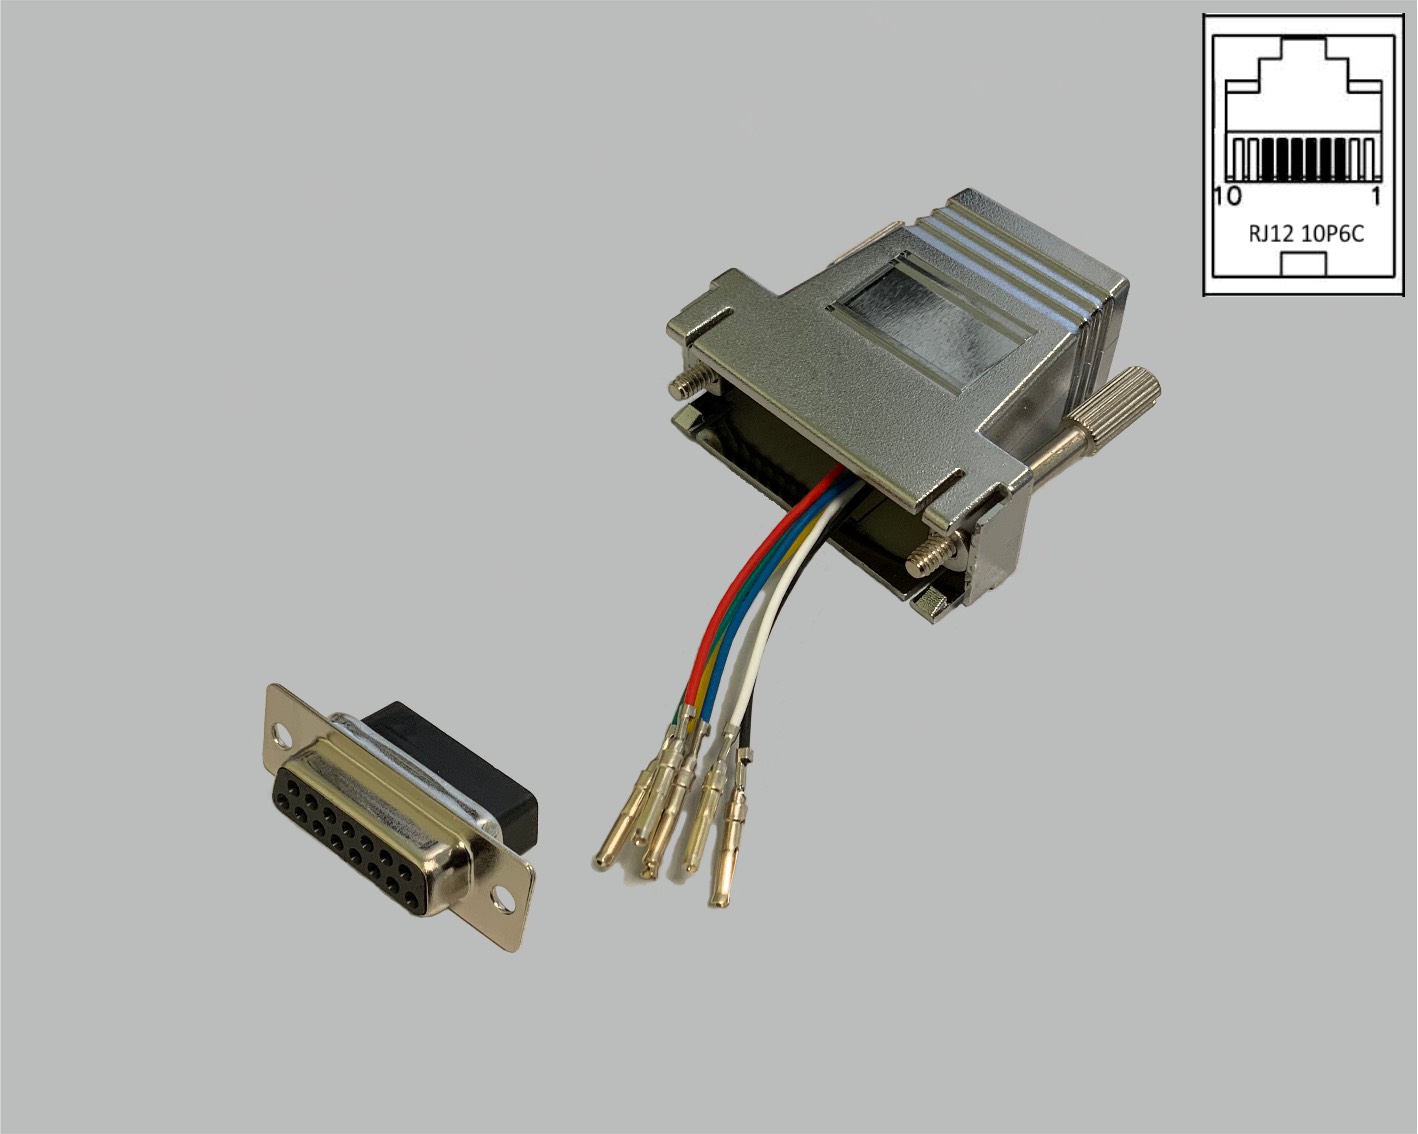 D-Sub/RJ adapter, freely configurable, D-Sub female connector 15-pole to RJ12 (10P6C) female connector, metallised